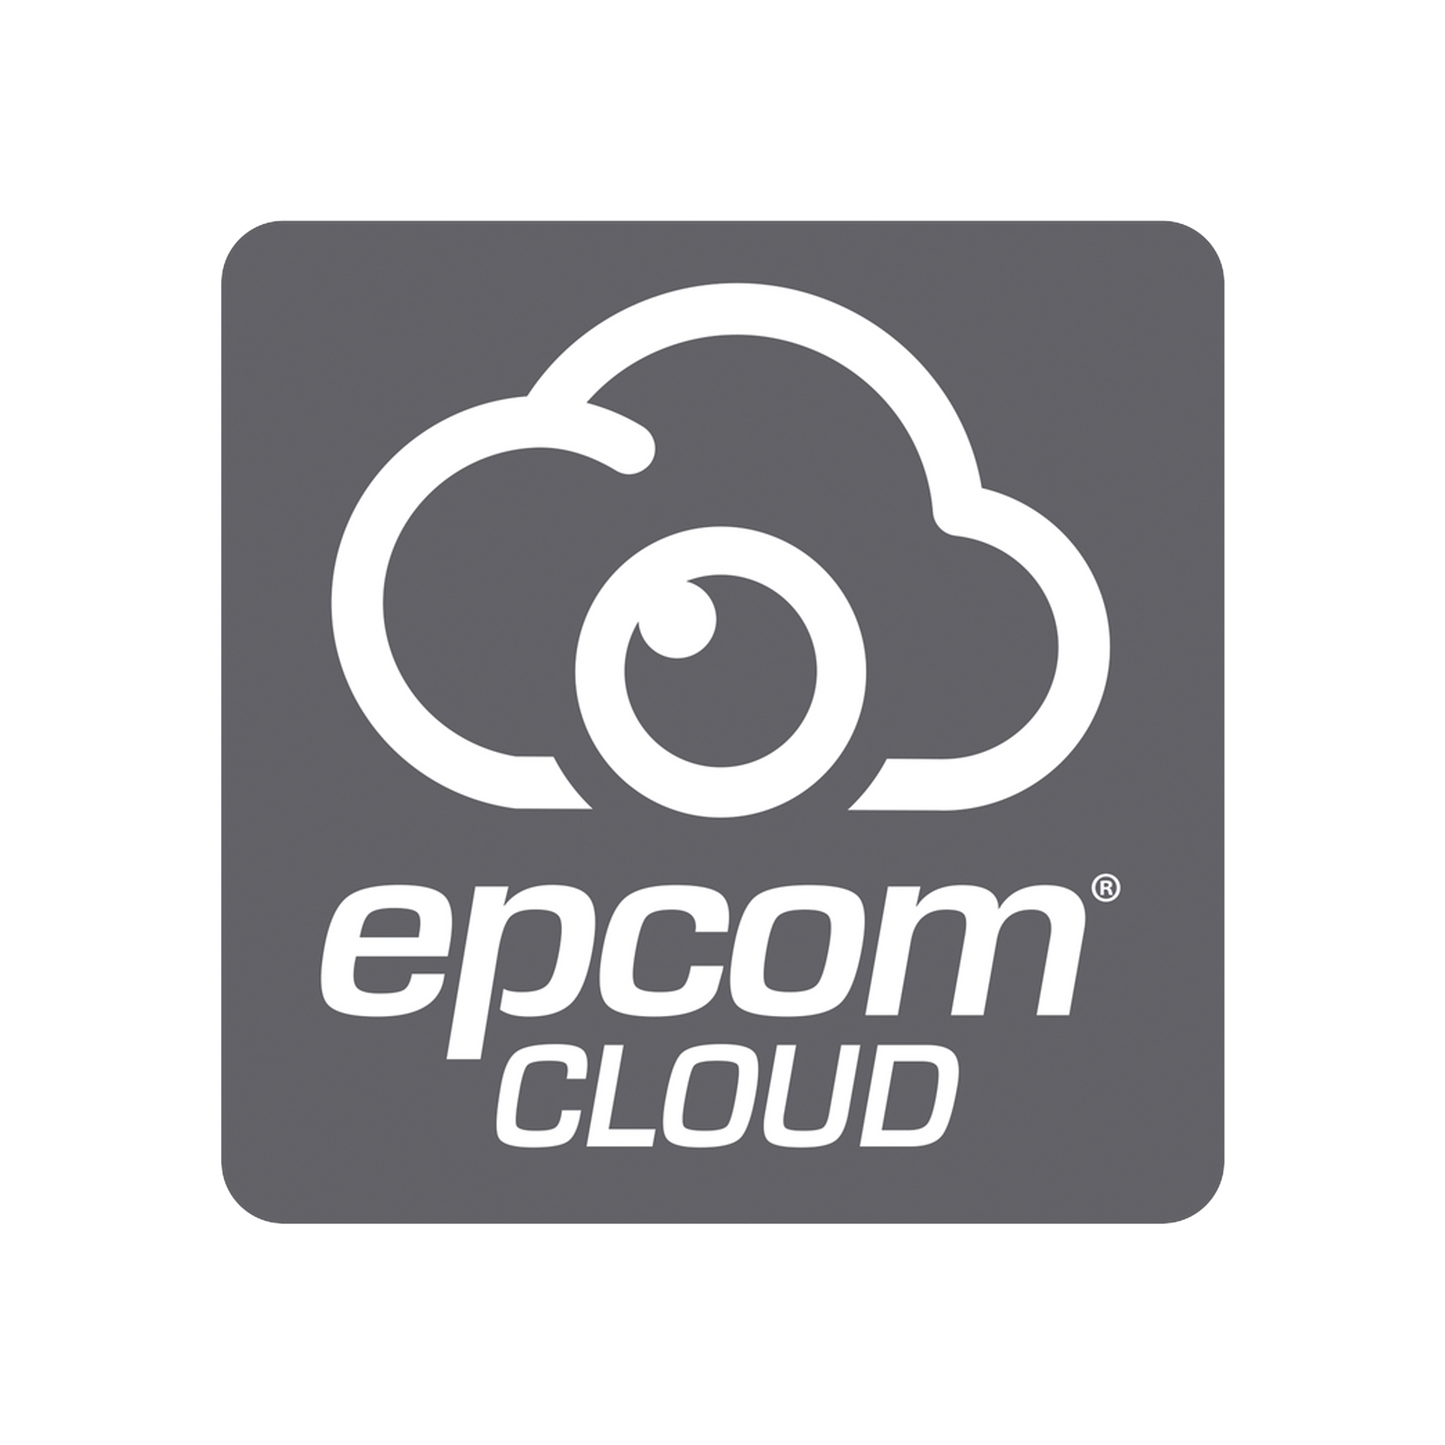 Epcom Cloud Annual Subscription / Cloud recording for 1 video channel at 8MP with 90 days retention / Continuous recording